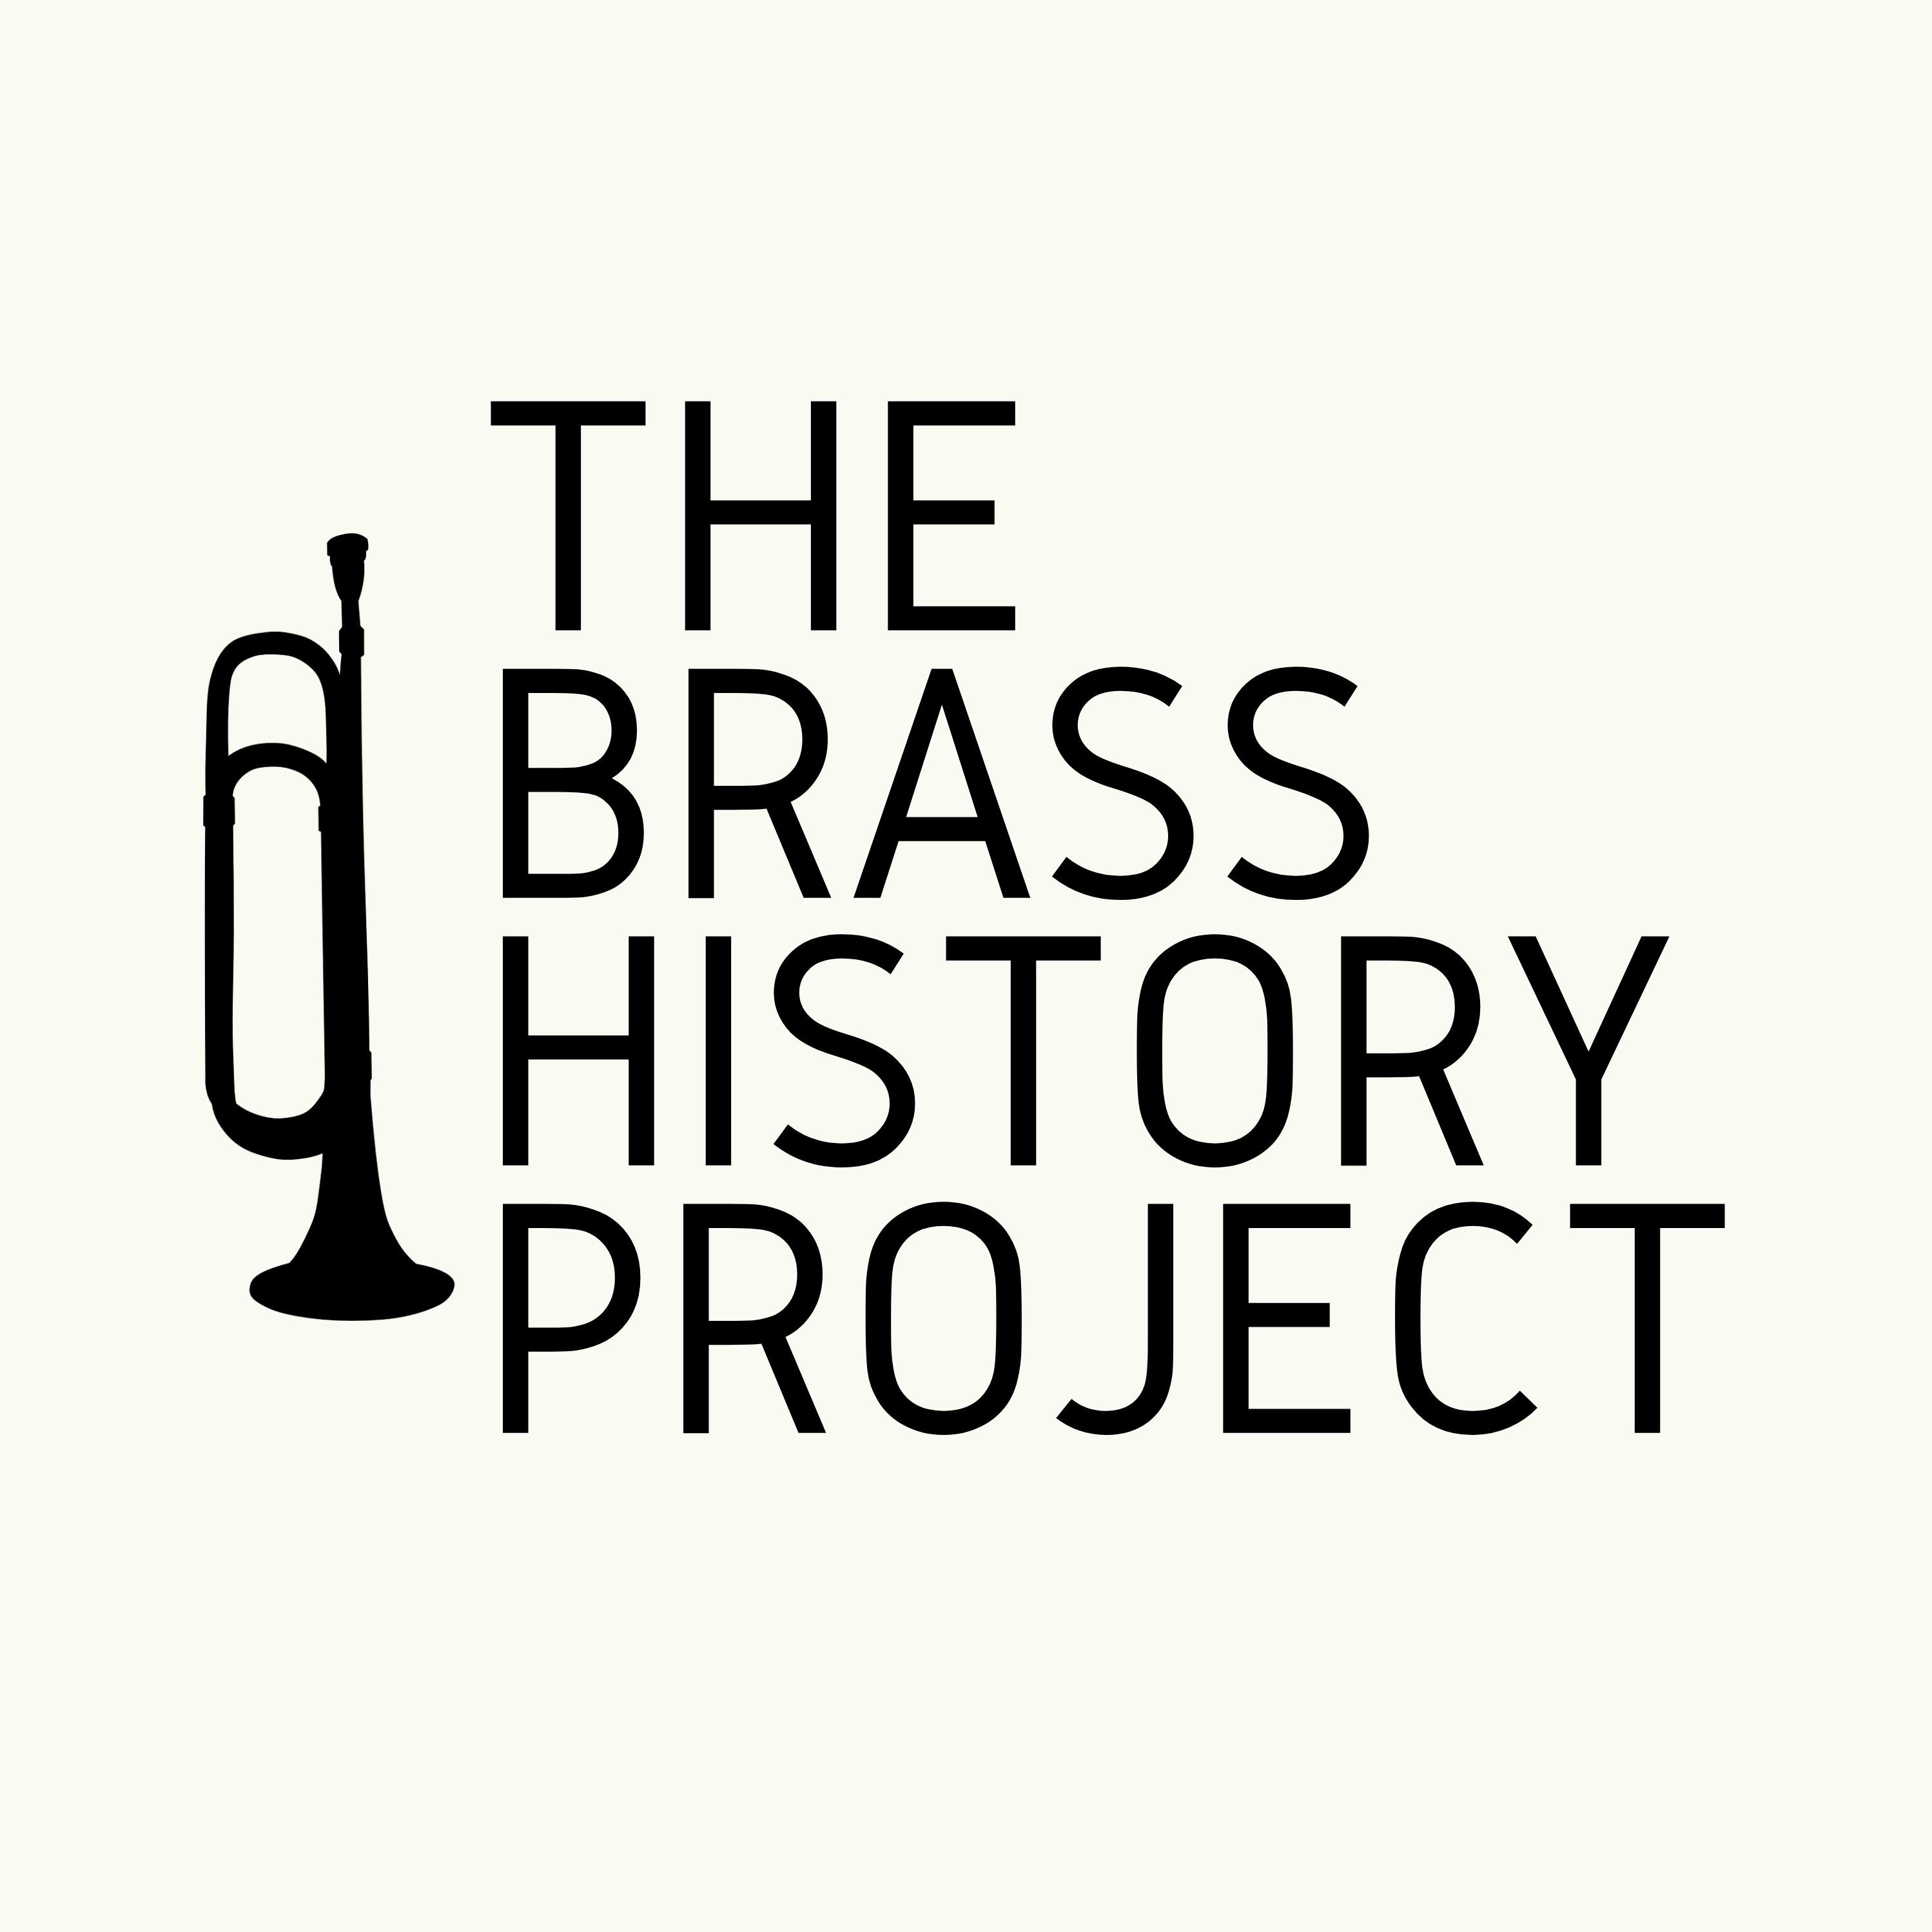 The Brass History Project